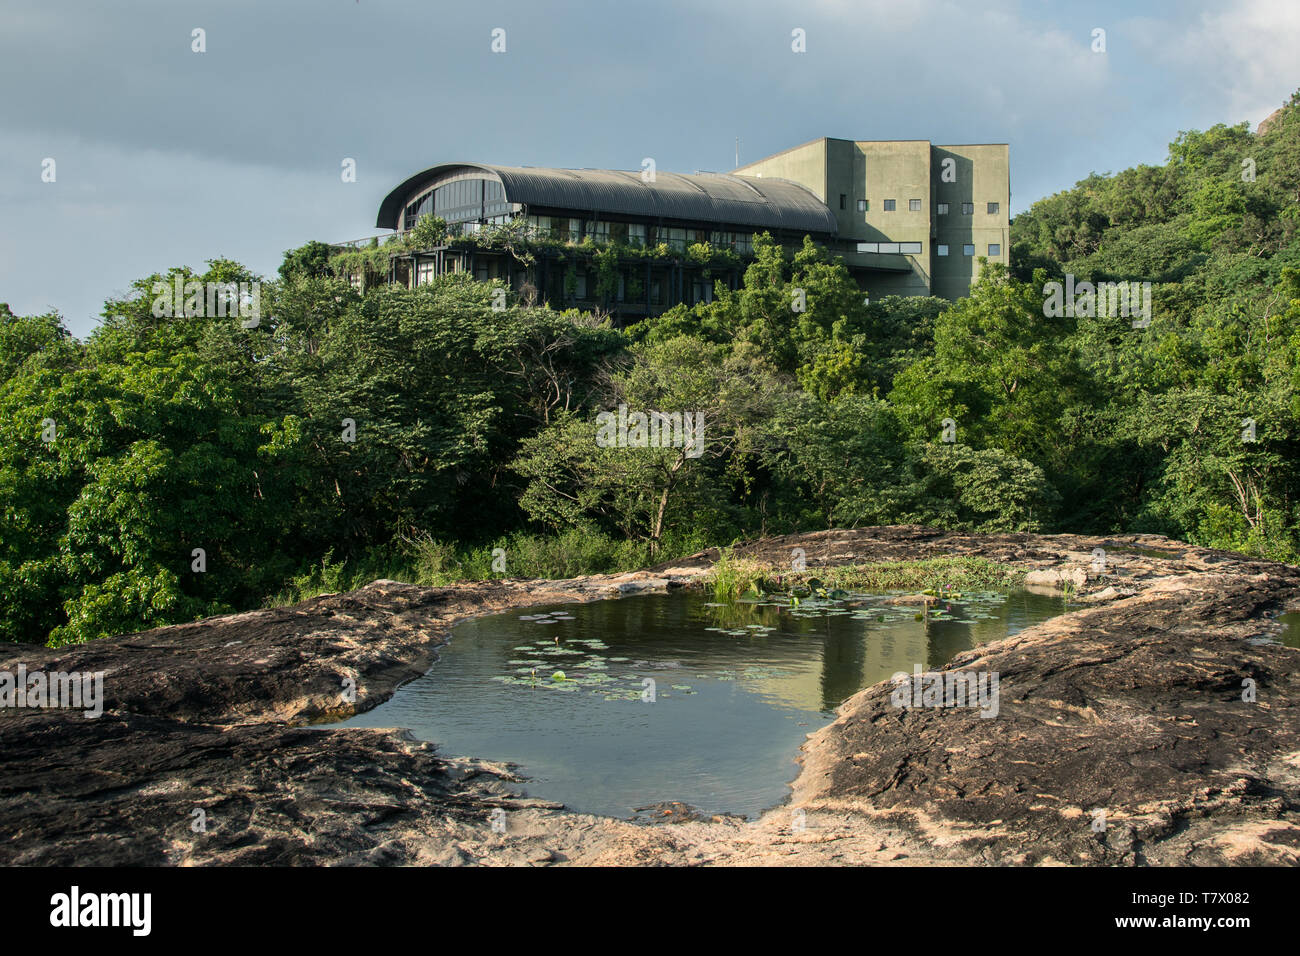 Heritance Kandalama Hotel, Sri Lanka, designed by Geoffrey Bawa, photographed from the rocks and jungle that border the building. Stock Photo